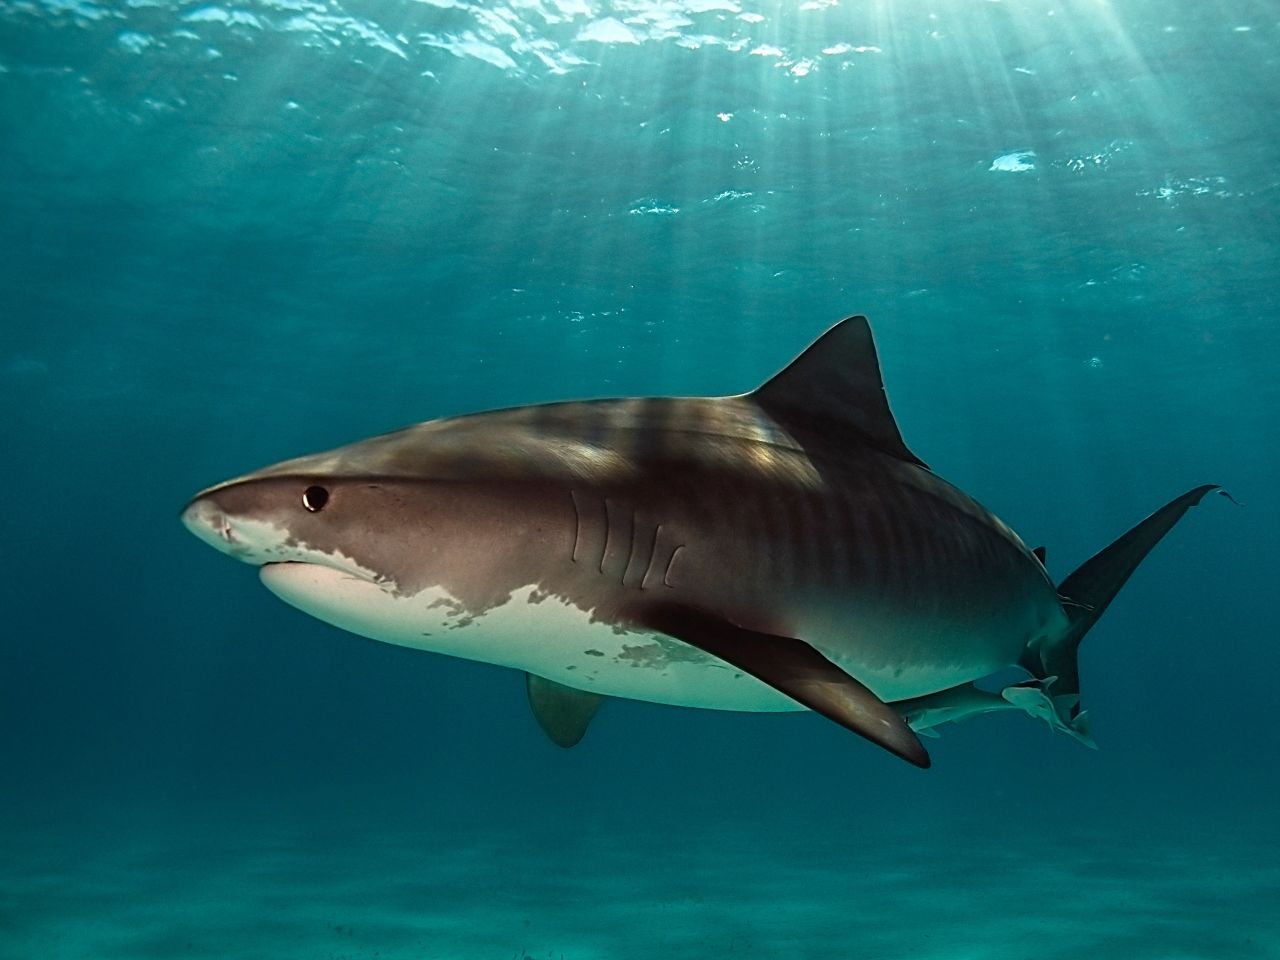 Experienced diver <a href="http://ireport.cnn.com/docs/DOC-1140657">Boaz Meiri</a> wishes more people would give sharks a break. "Sharks are not what they remember from the movie 'Jaws,'" he said. Meiri photographed a large female tiger shark 19 feet underwater at Tiger Beach in Nassau, Bahamas.